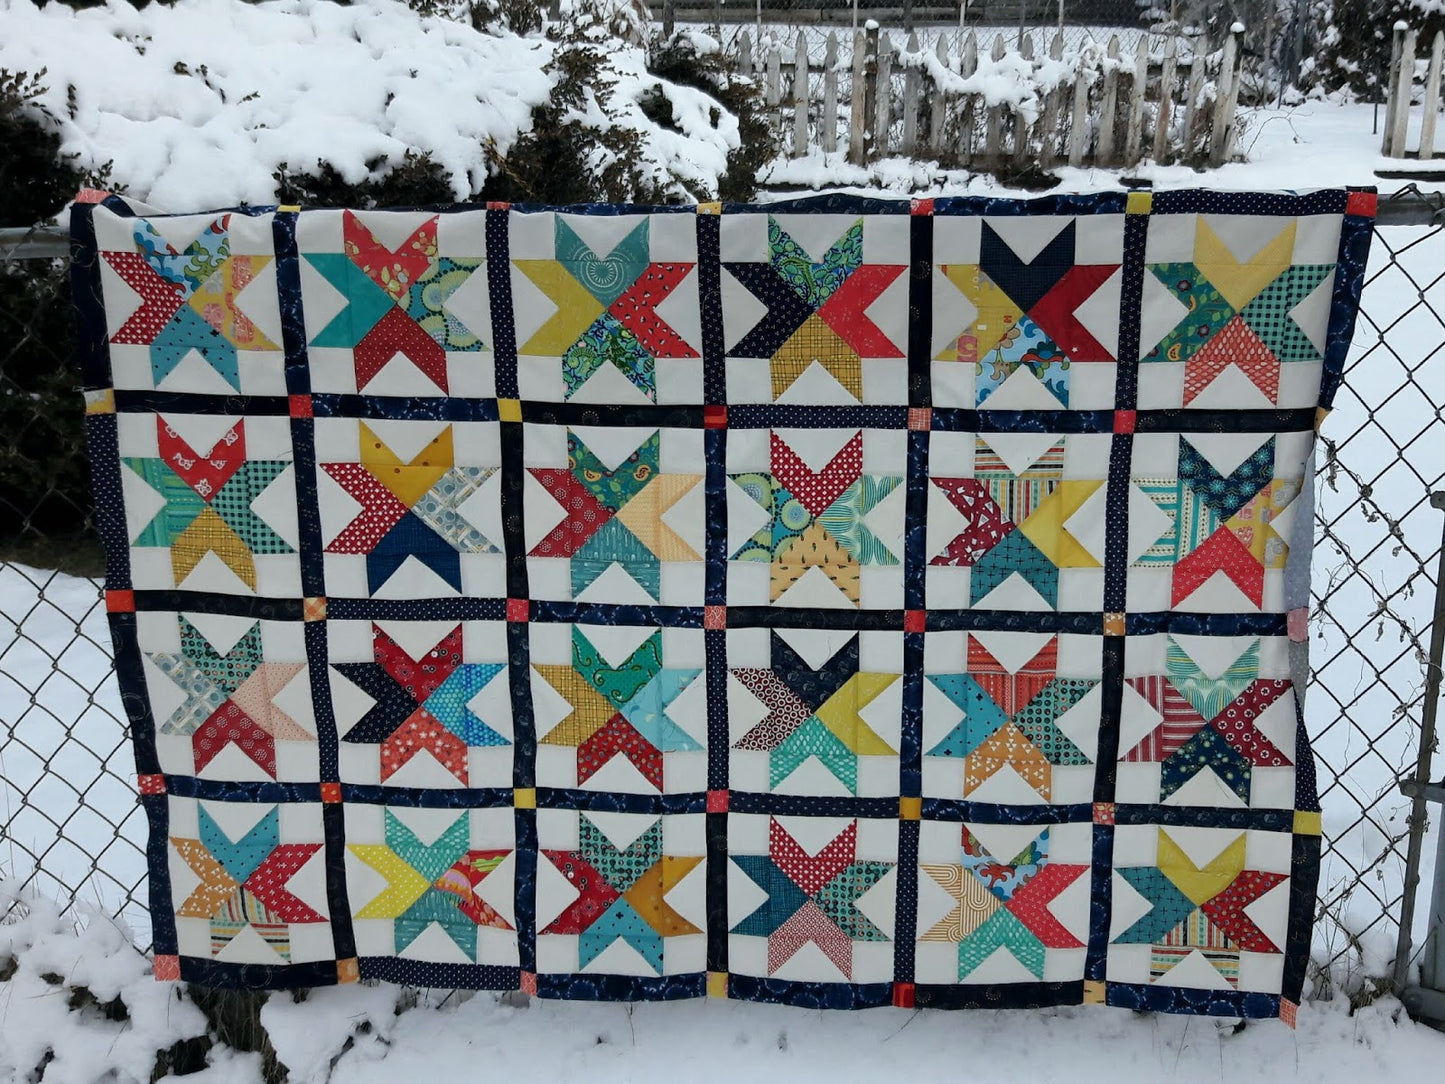 Braveheart Picnic Quilt & Matching Table Runner - Quilt Pattern PDF